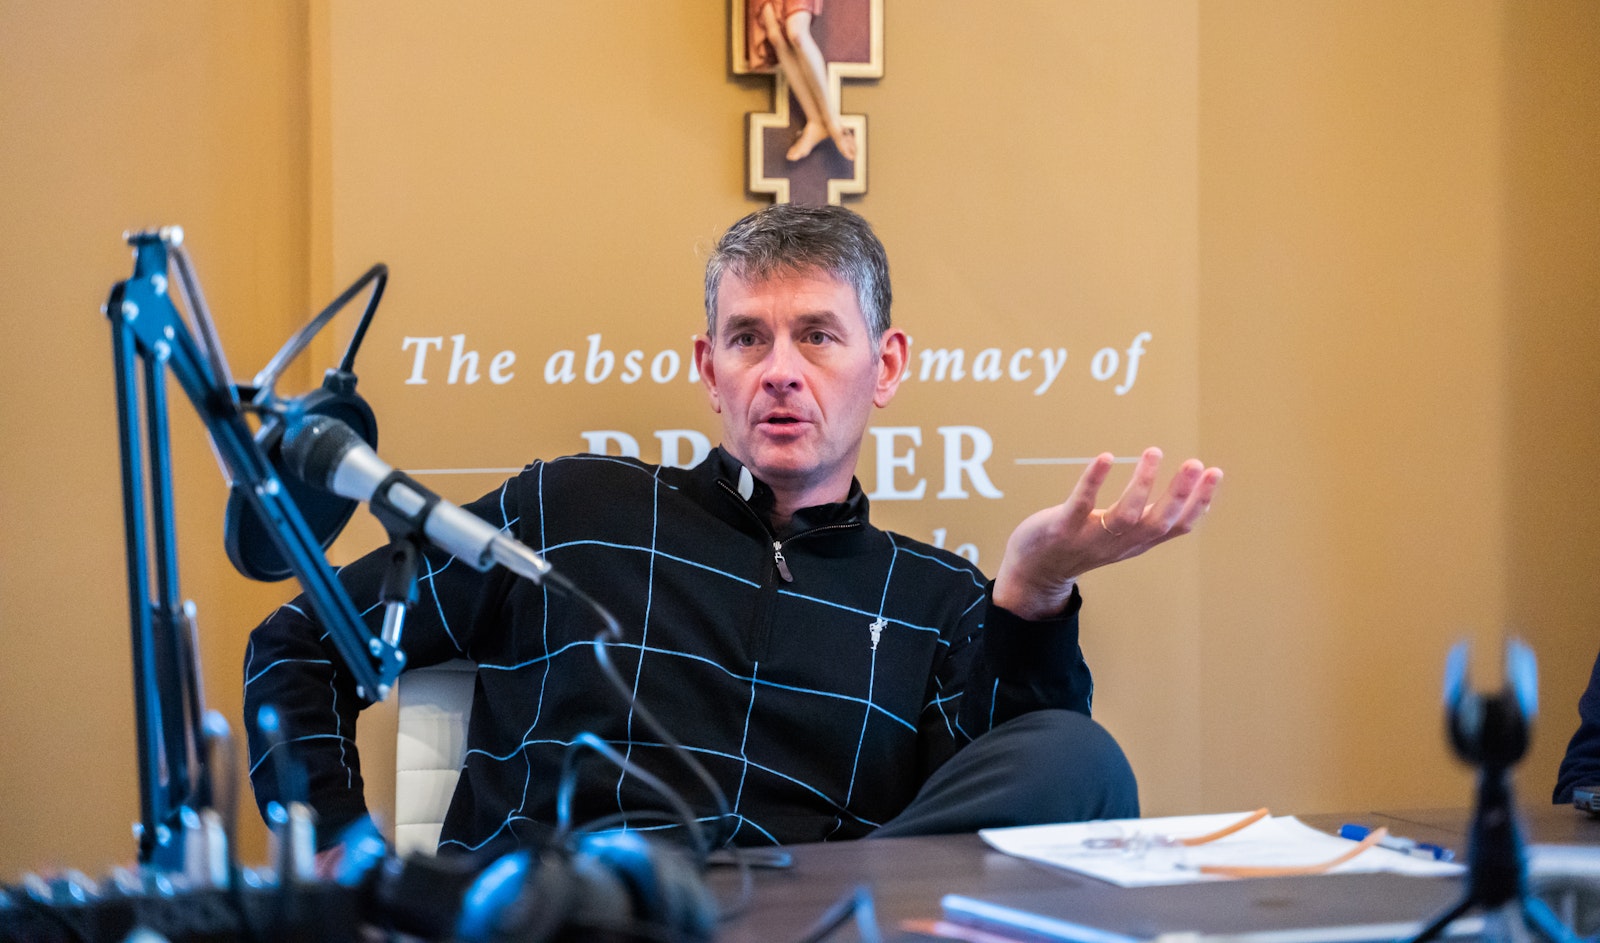 Fr. John Riccardo, a priest of the Archdiocese of Detroit and executive director of ACTS XXIX, produces a weekly podcast with his apostolate called "You Were Born For This." (Valaurian Waller | Detroit Catholic)